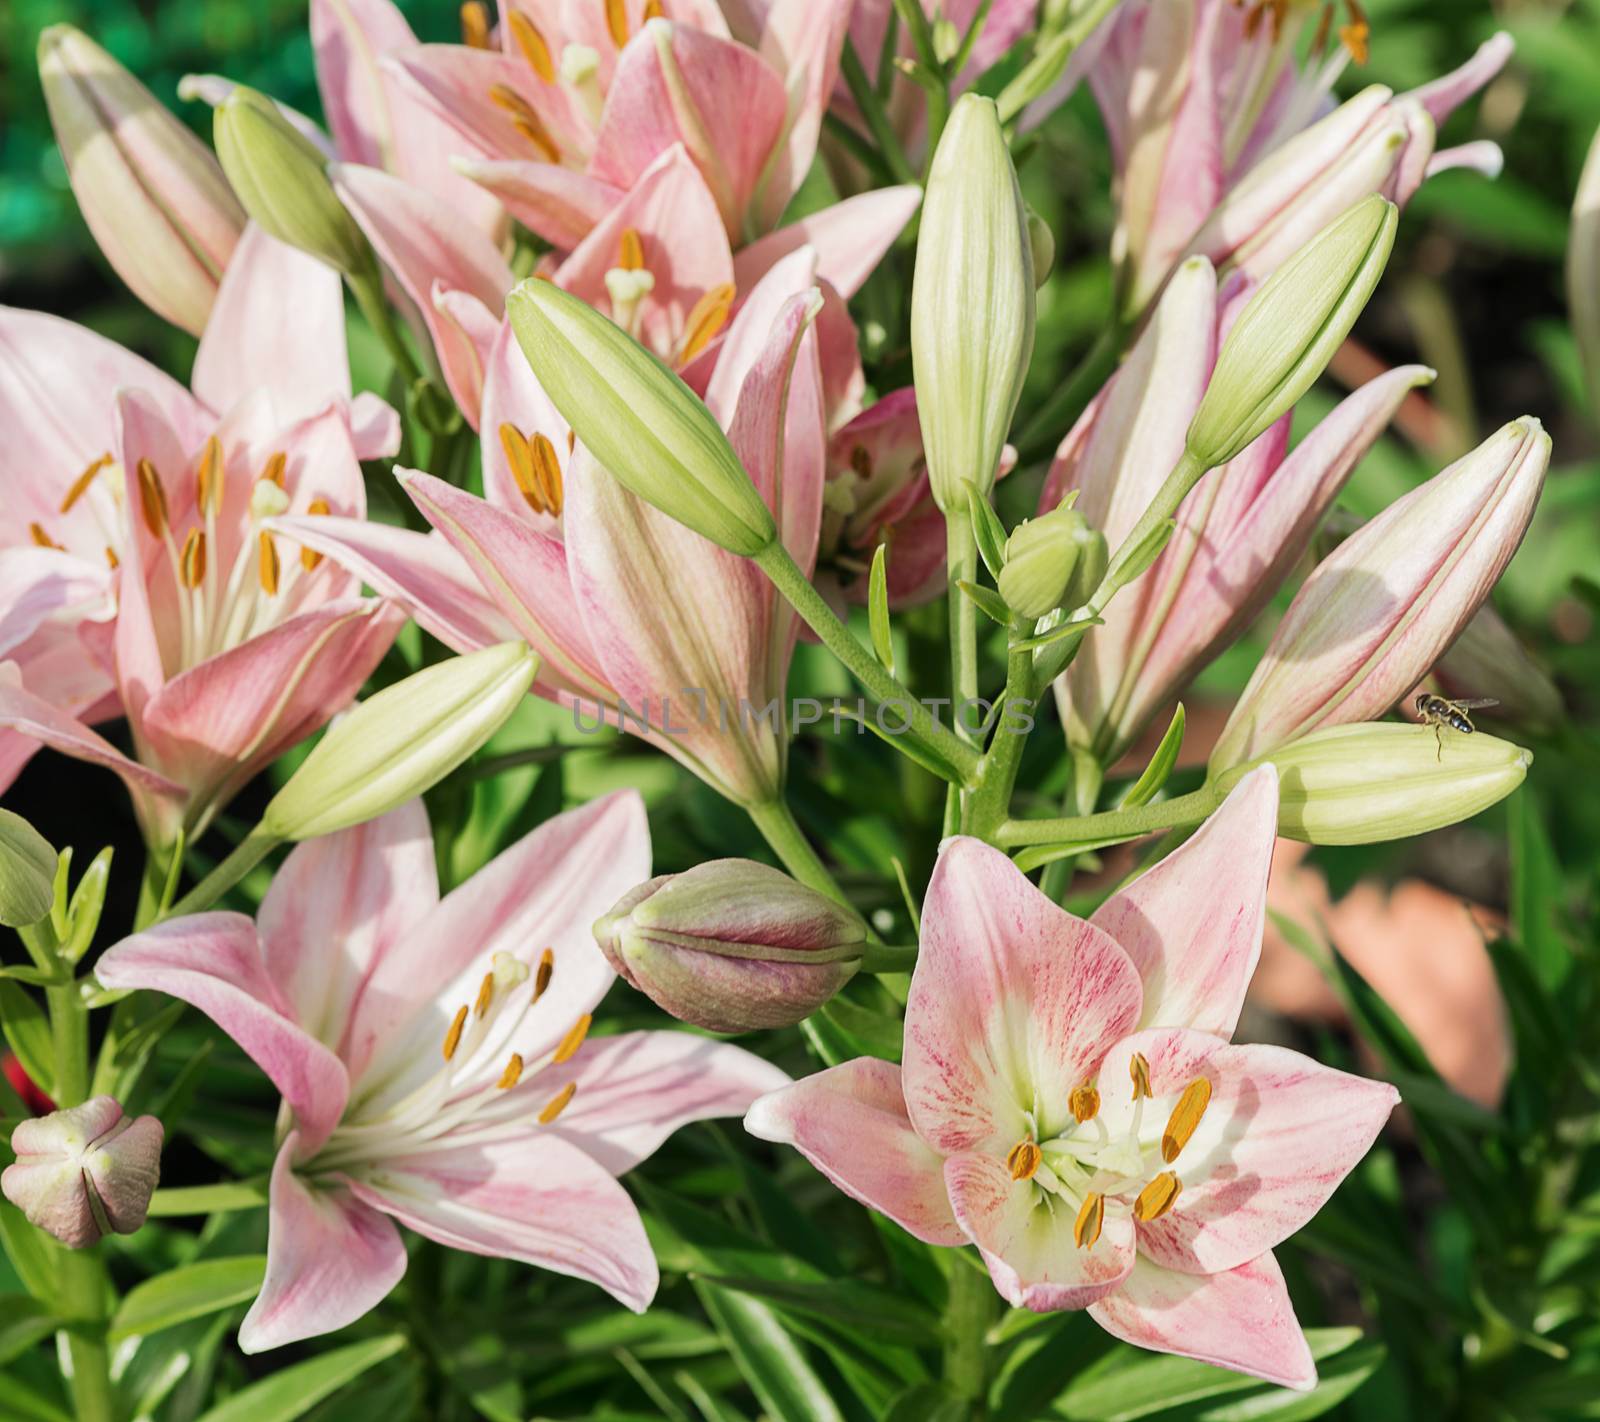 Many large flowers of beautiful pink lilies outdoors close-up